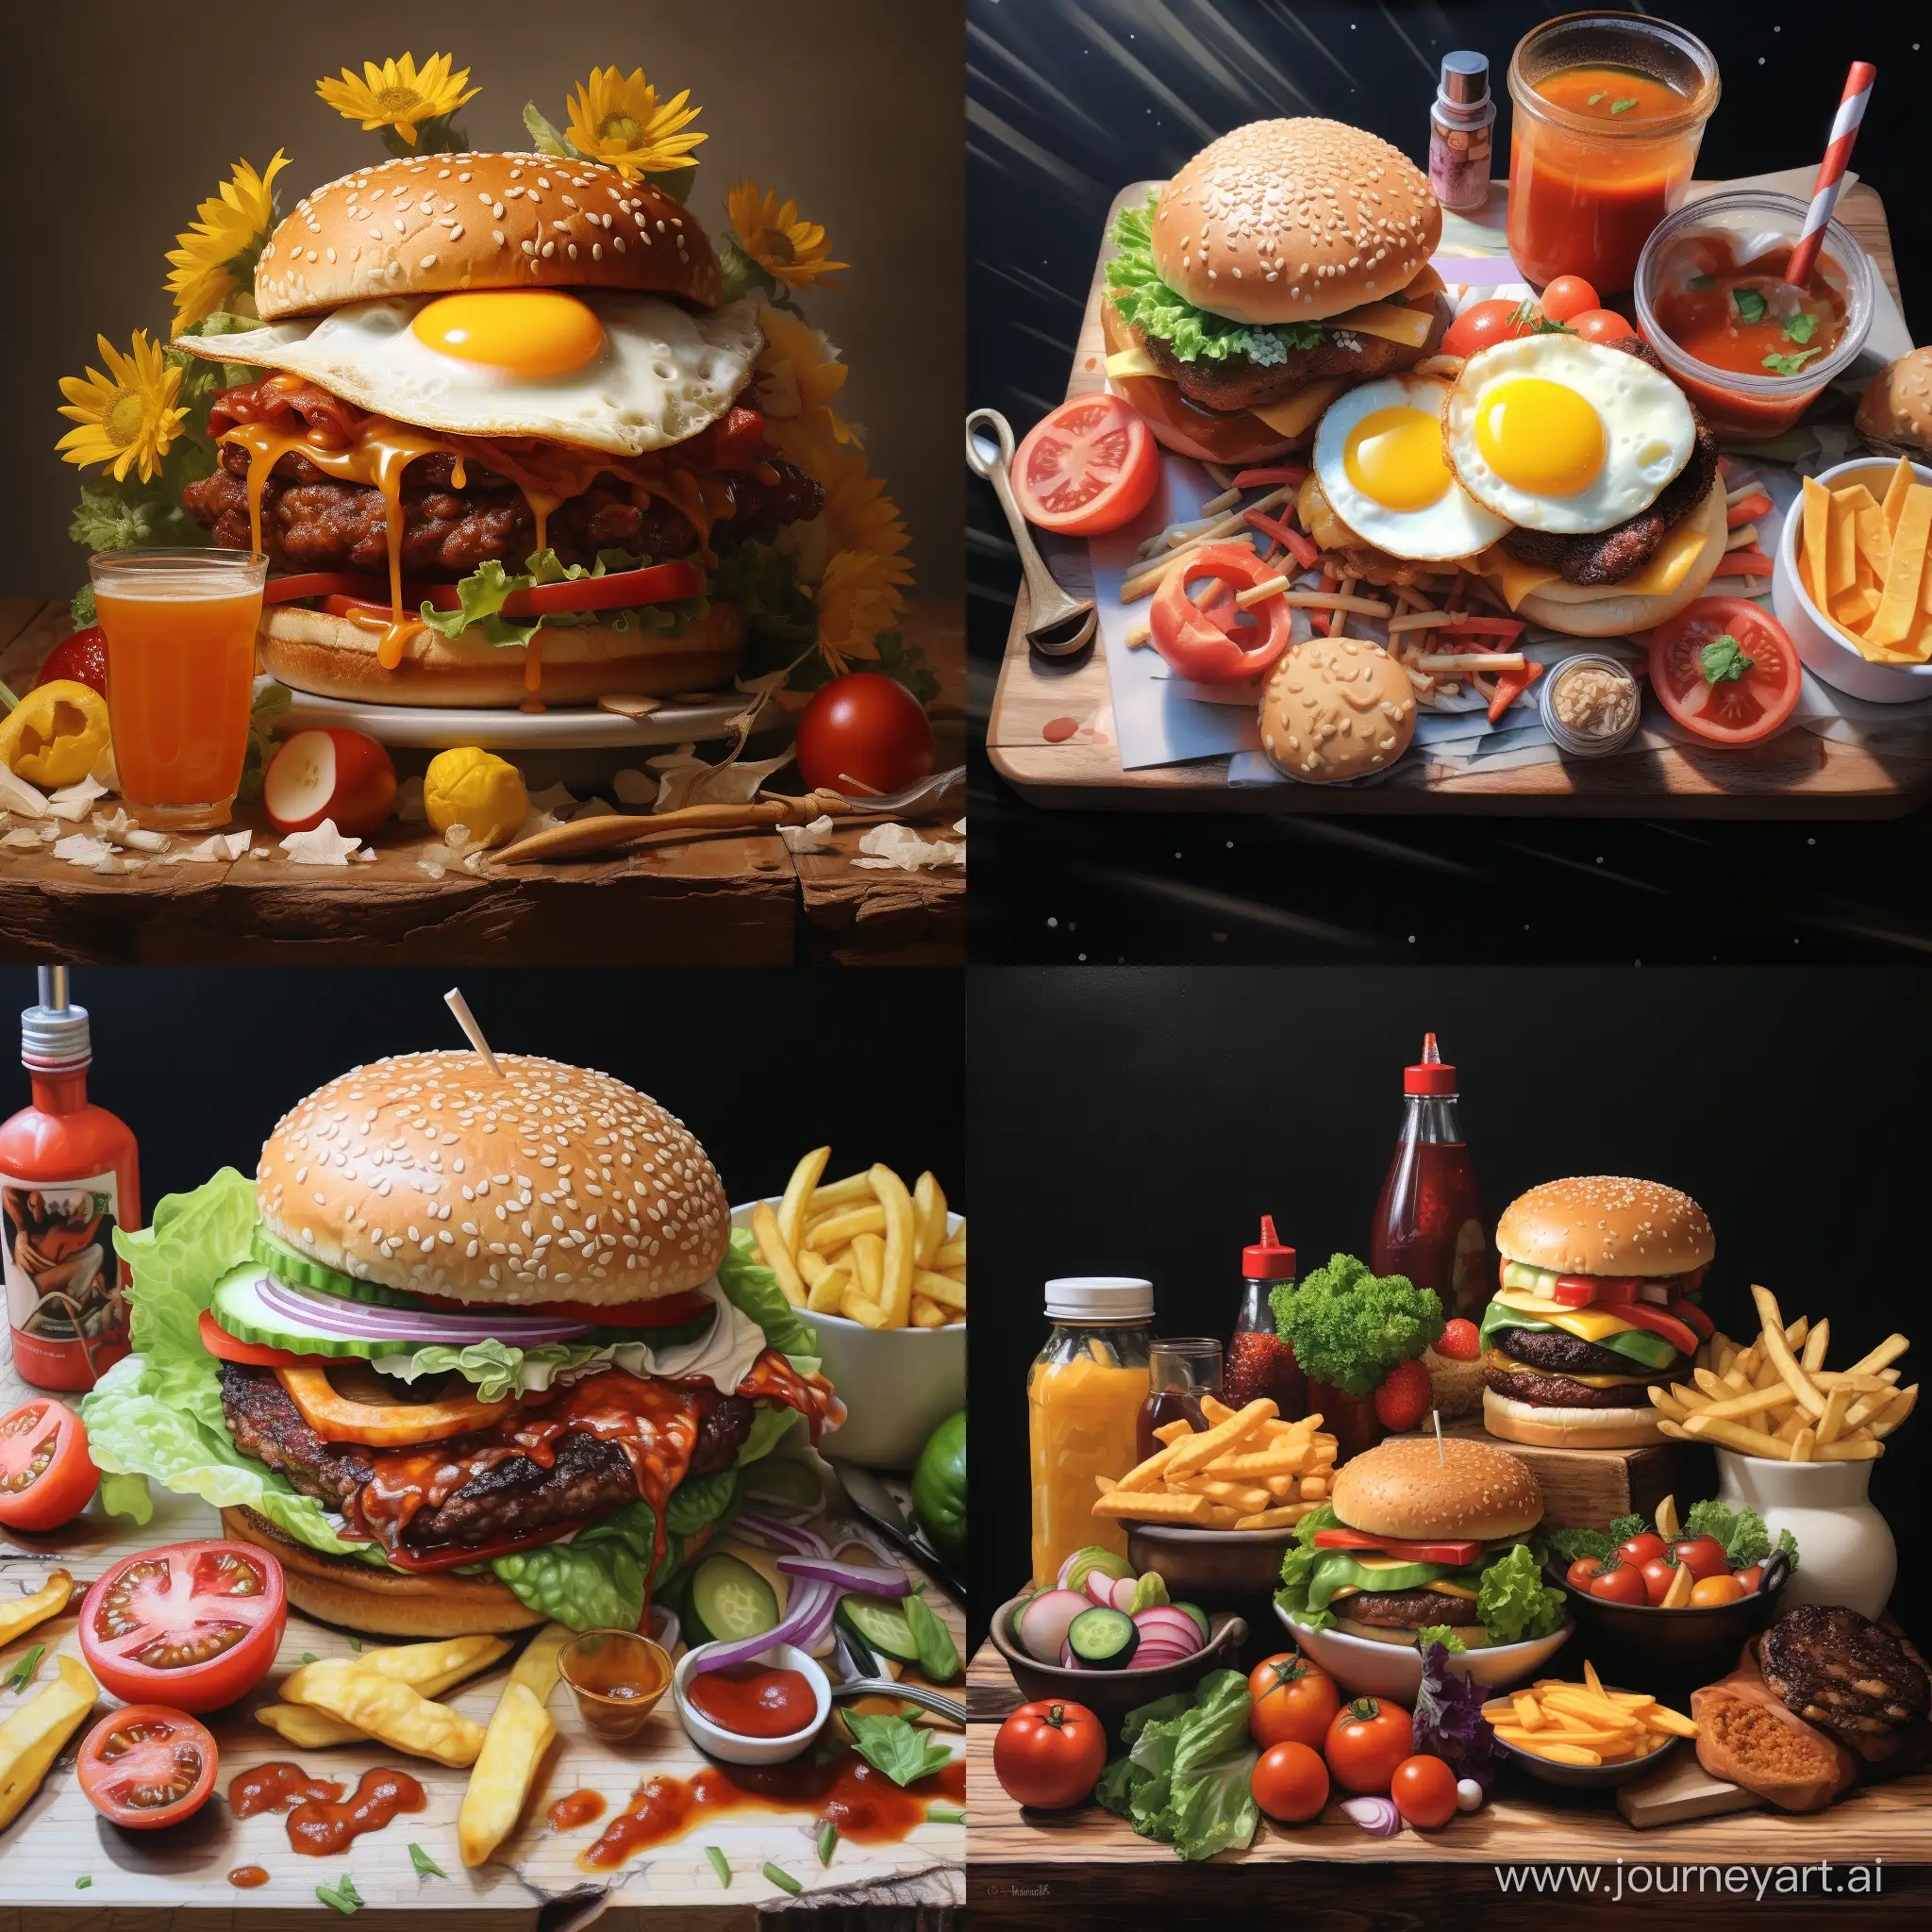 Exquisite-Realistic-Food-Art-in-11-Aspect-Ratio-Captivating-Culinary-Creations